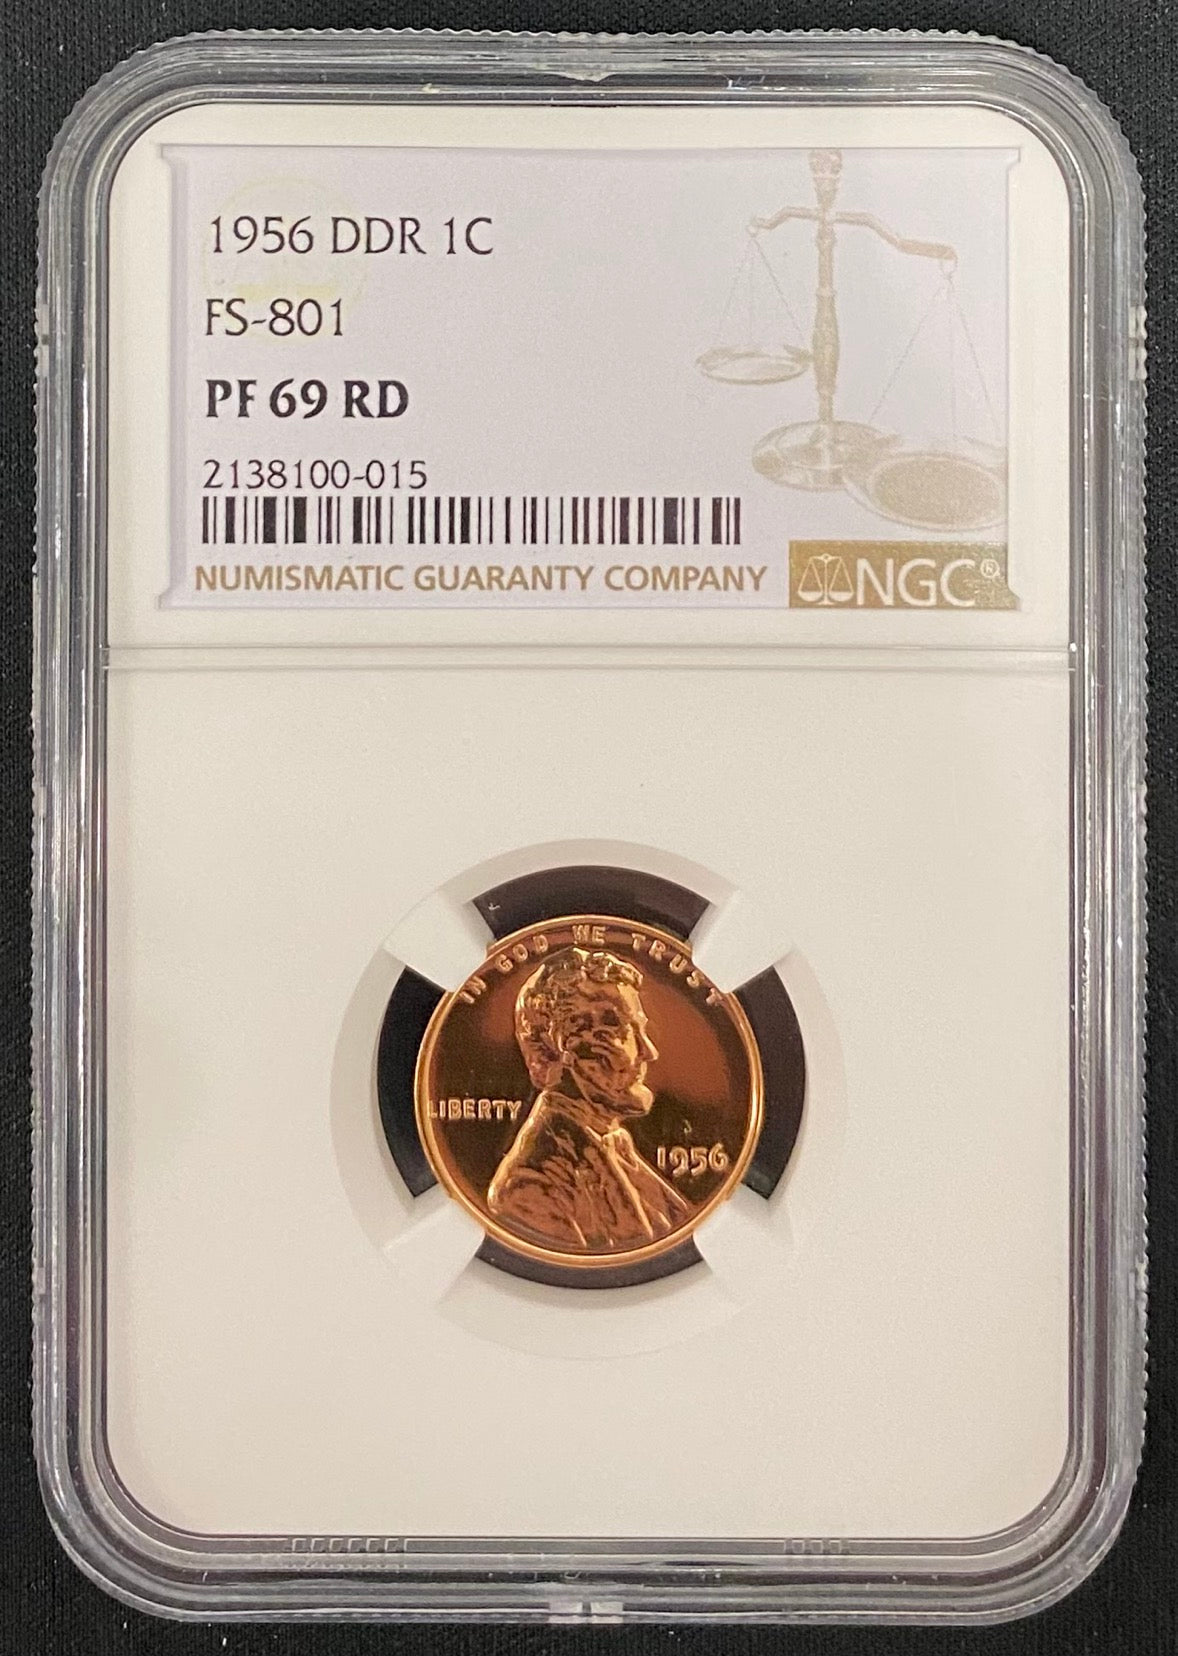 1956 Lincoln Cent - DDR - FS-801 NGC PF69 RD DDR